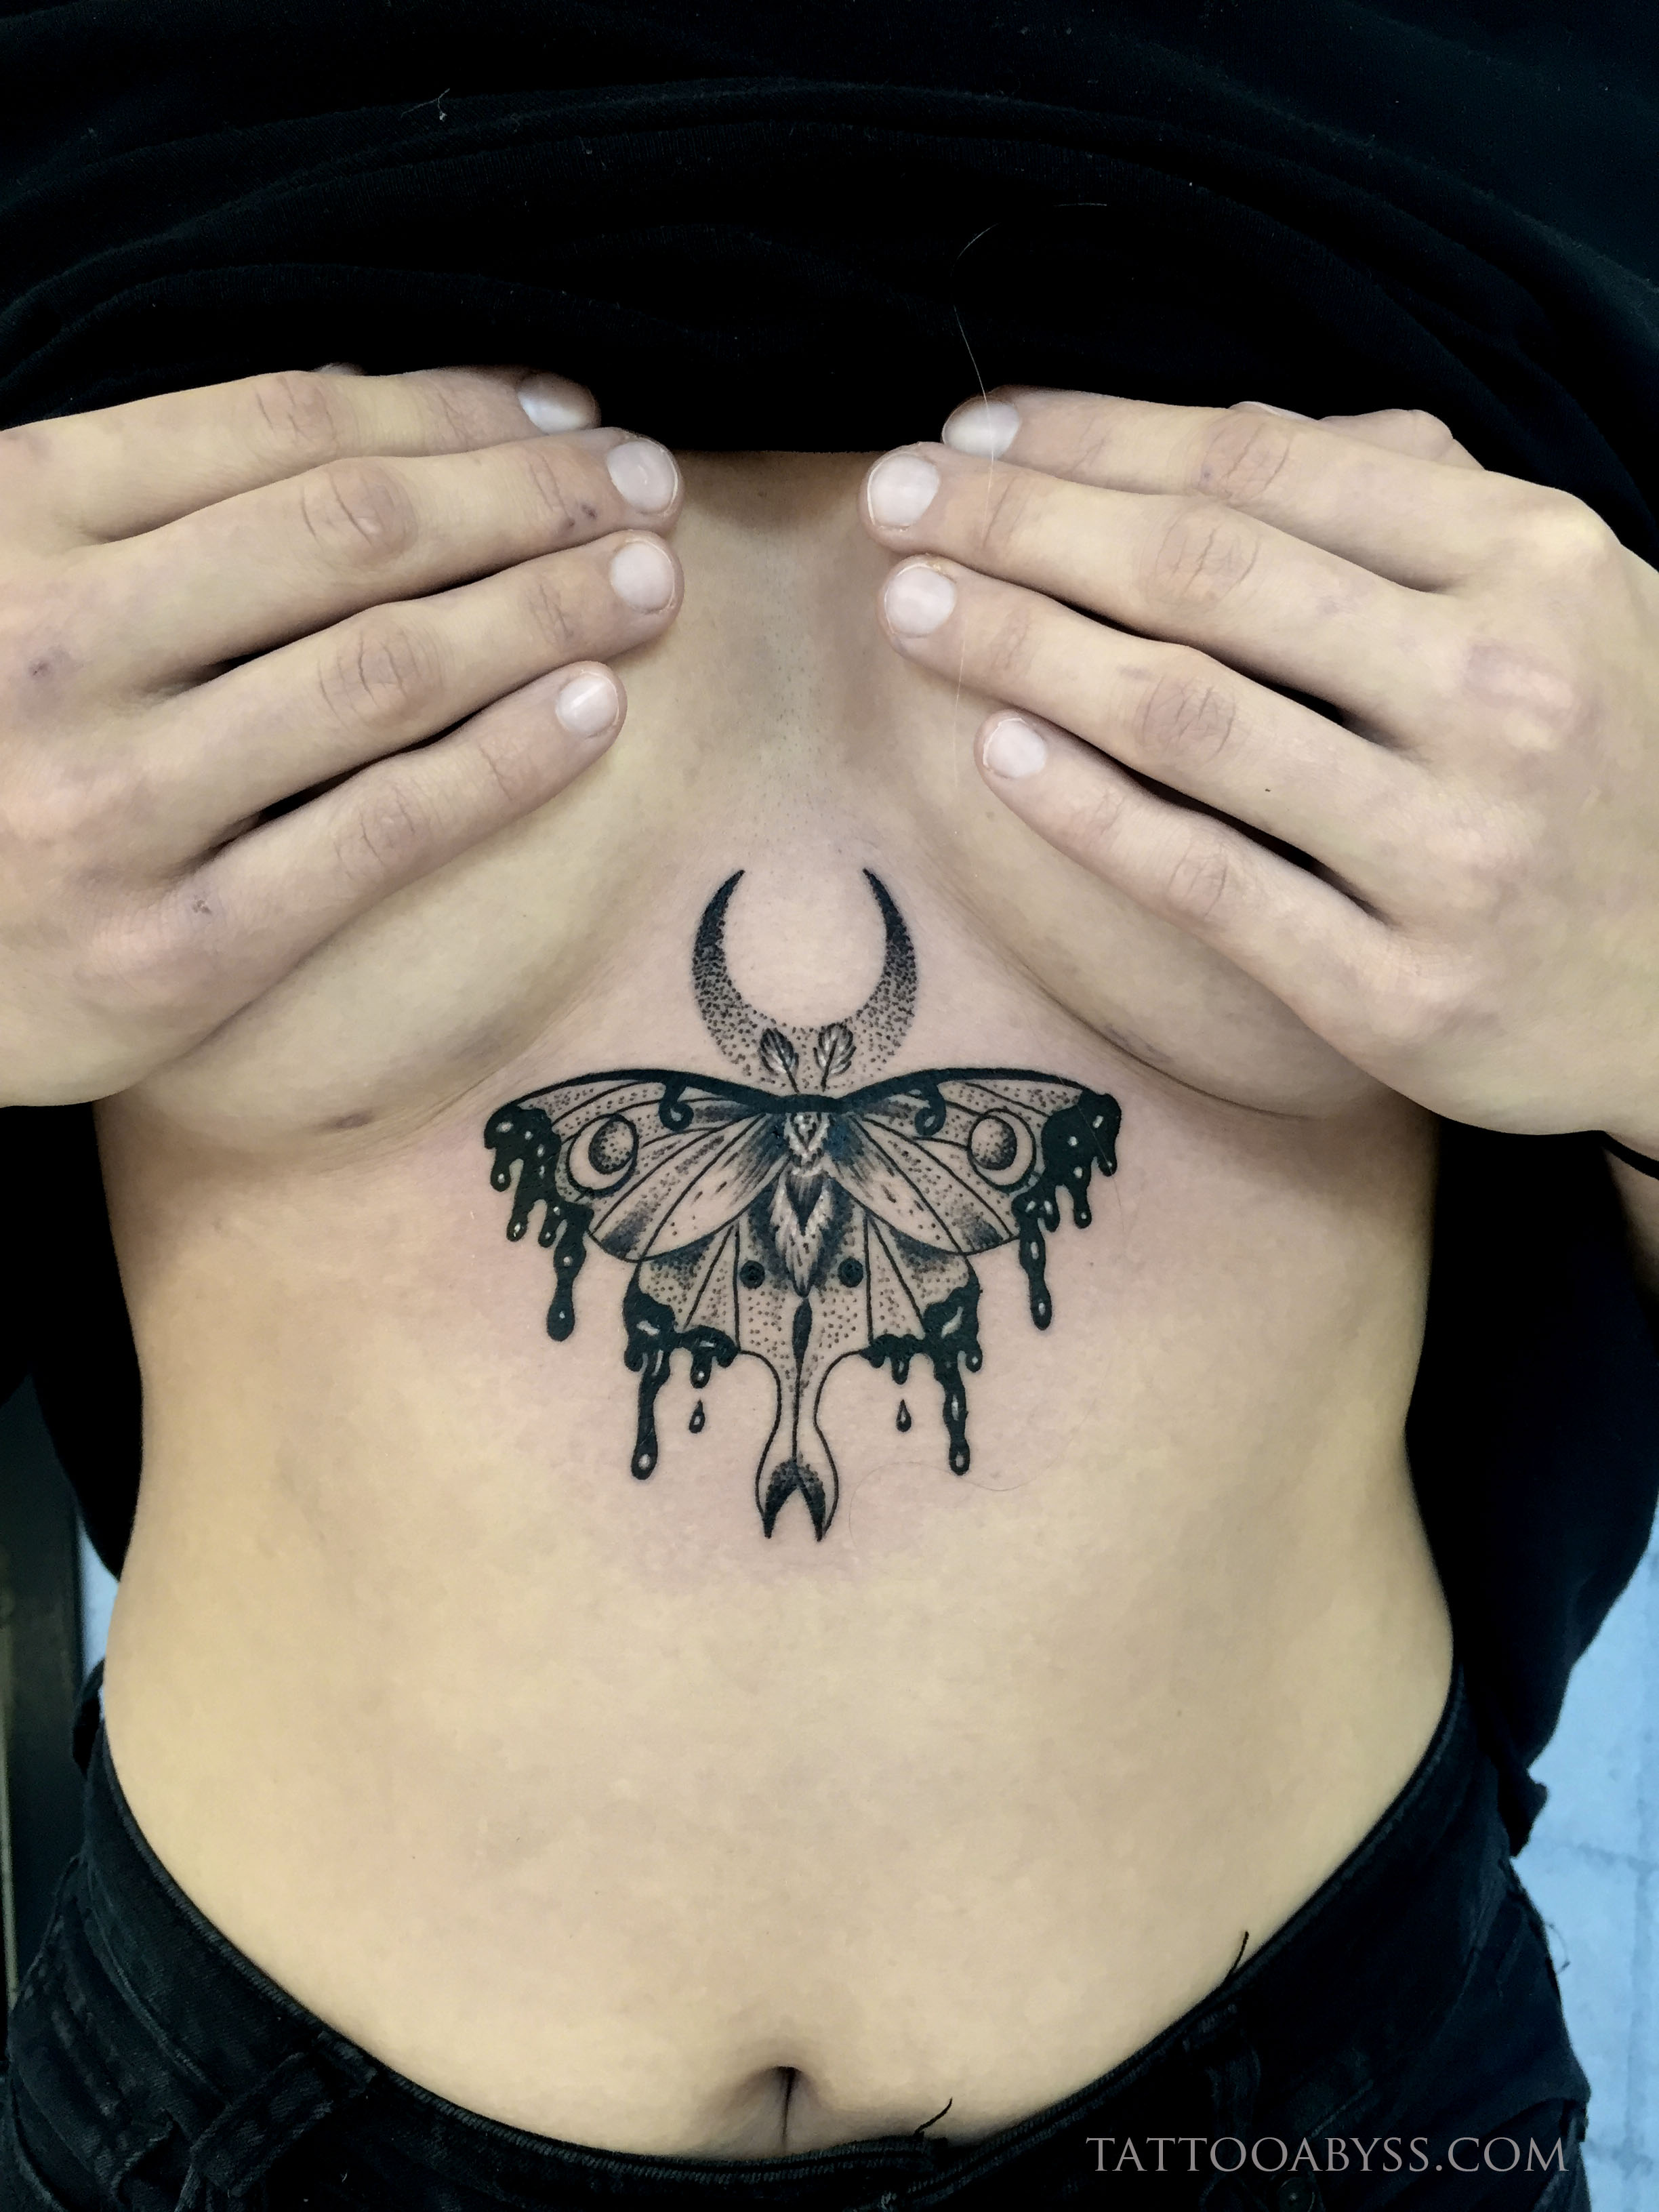 Ultimate Inc on Twitter black and grey bee flowers underboob tattoo  tattooed by Lee at ultimateincTATS 01443401222 httpstco4xbGz2m9X5   Twitter